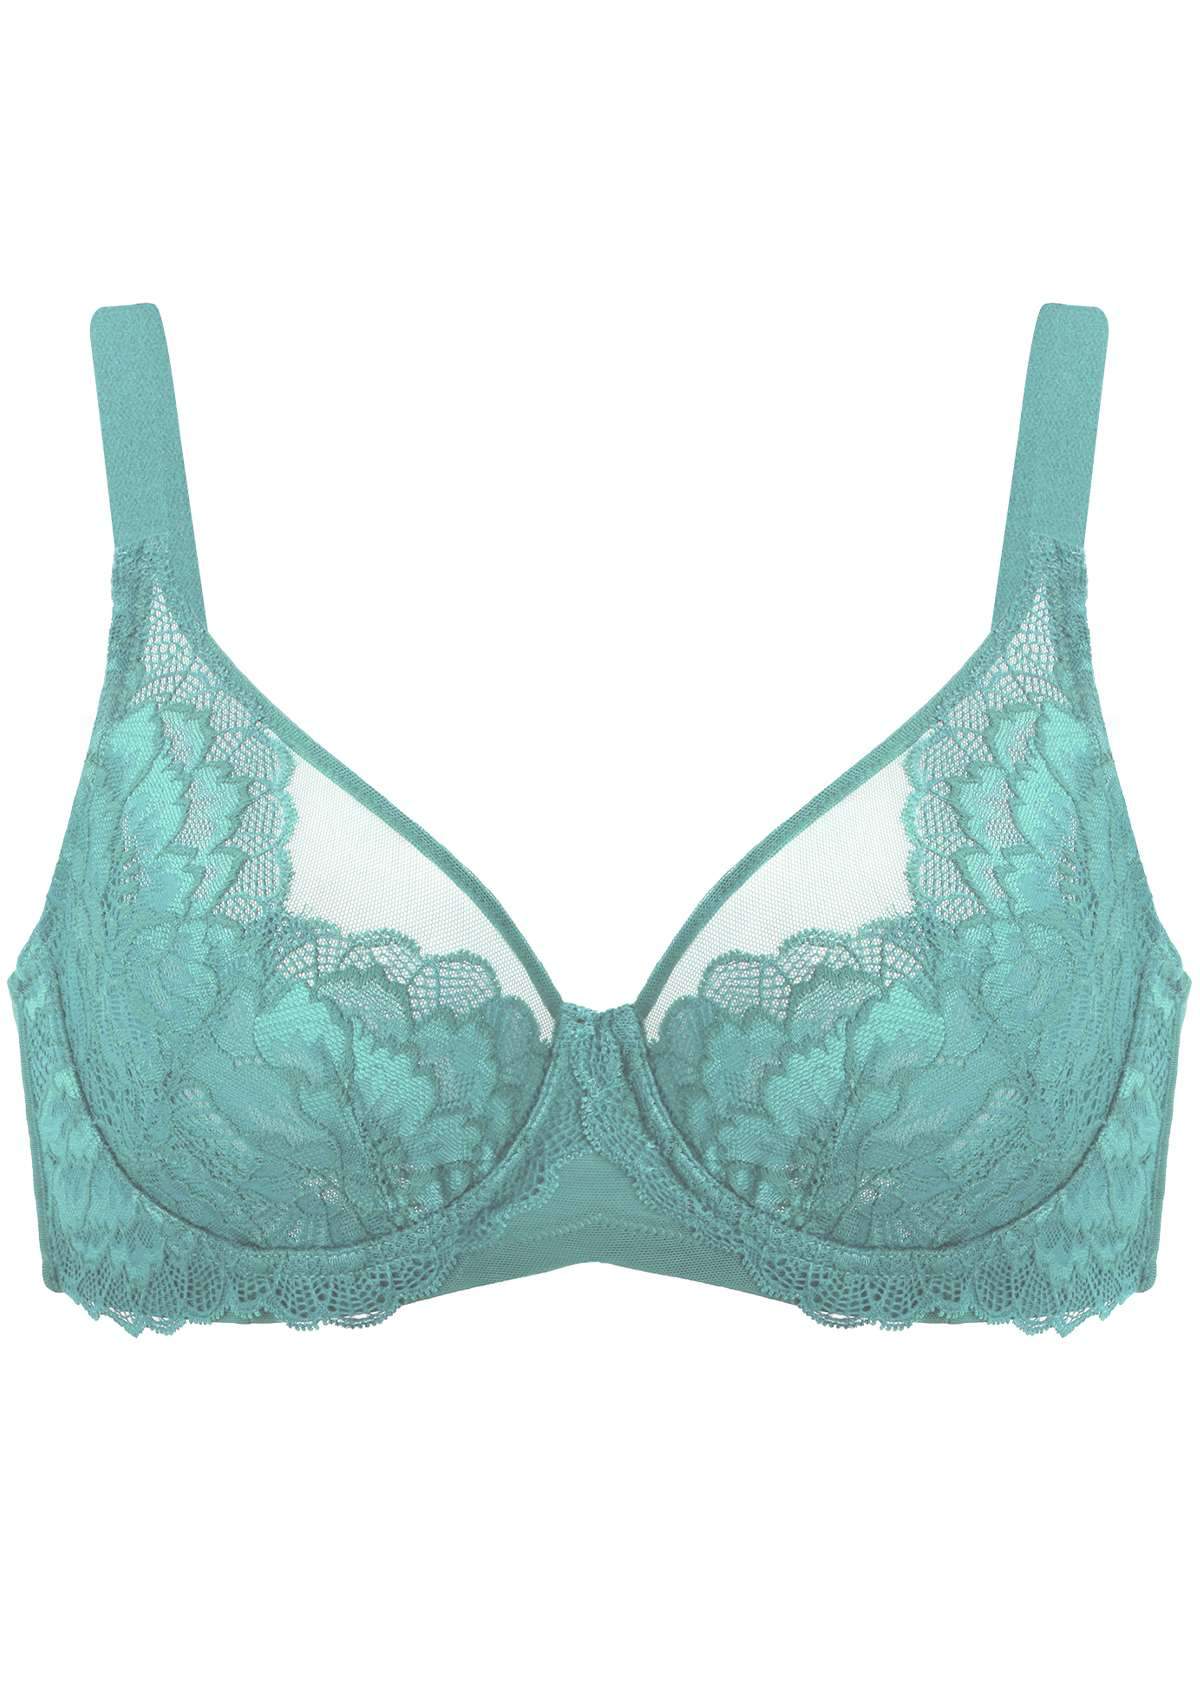 HSIA Paeonia Lace Full Coverage Underwire Non-Padded Uplifting Bra - Teal / 40 / DDD/F